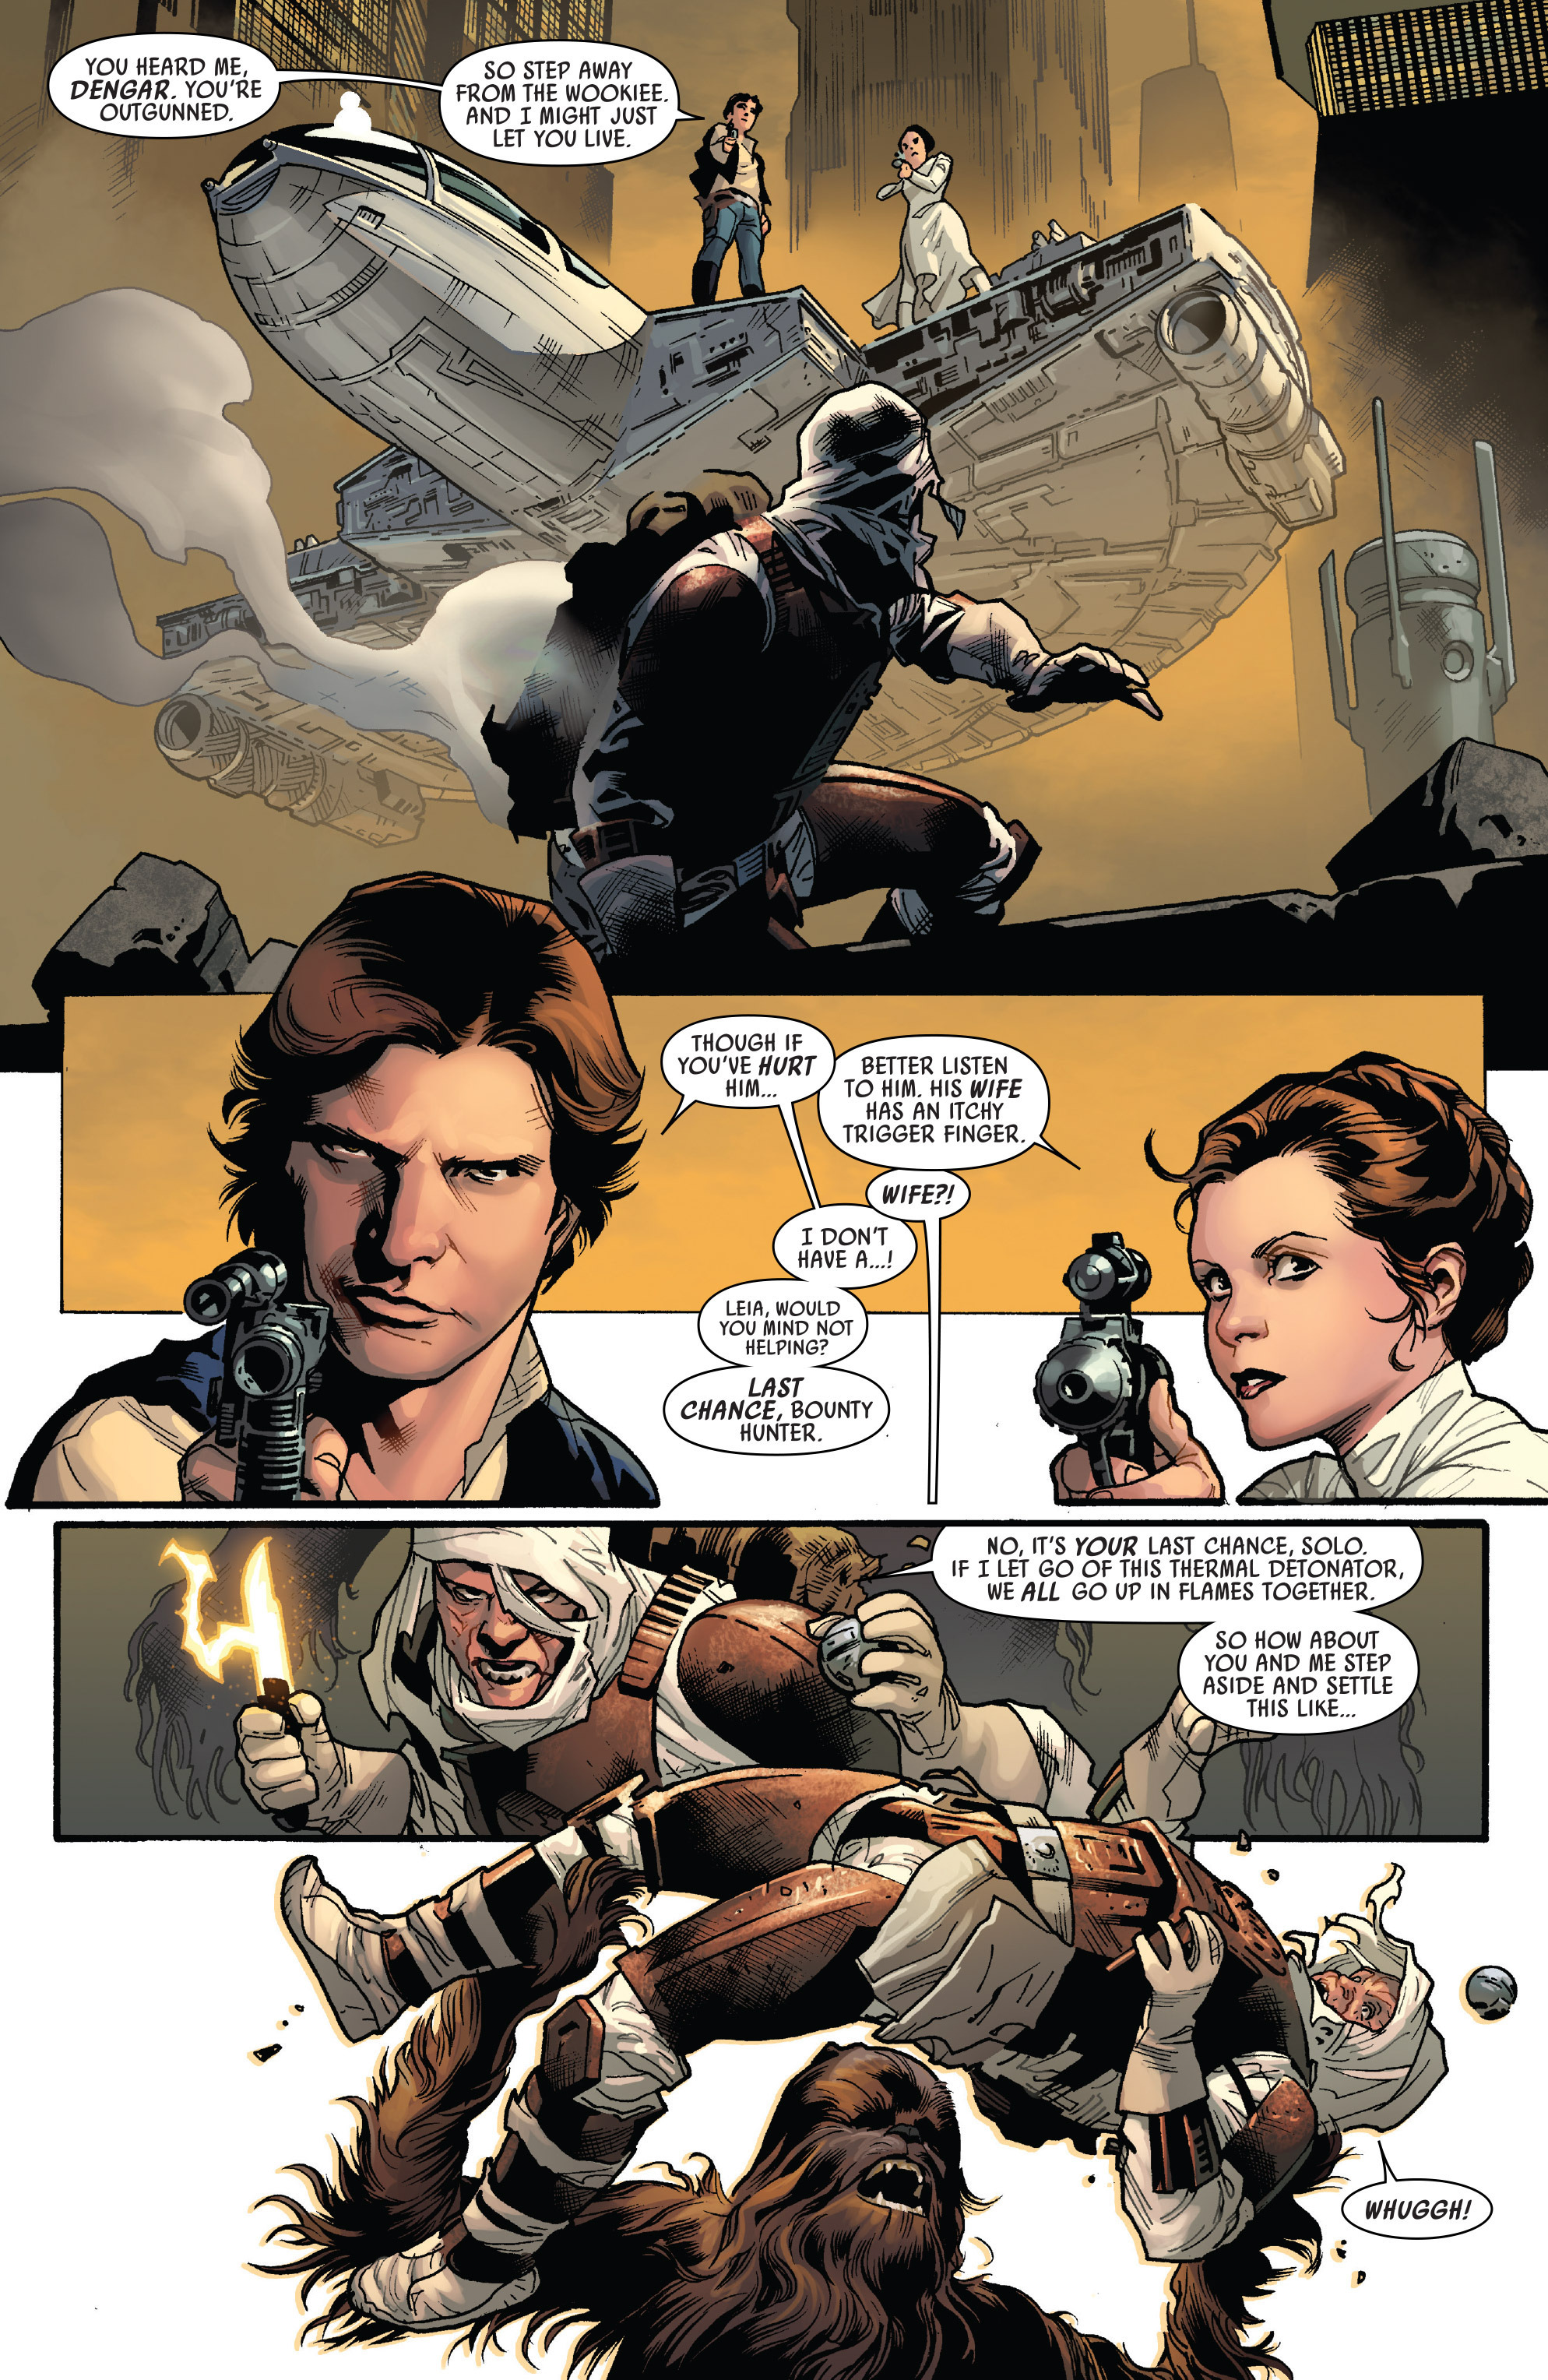 Star Wars (2015-): Chapter 12 - Page 5